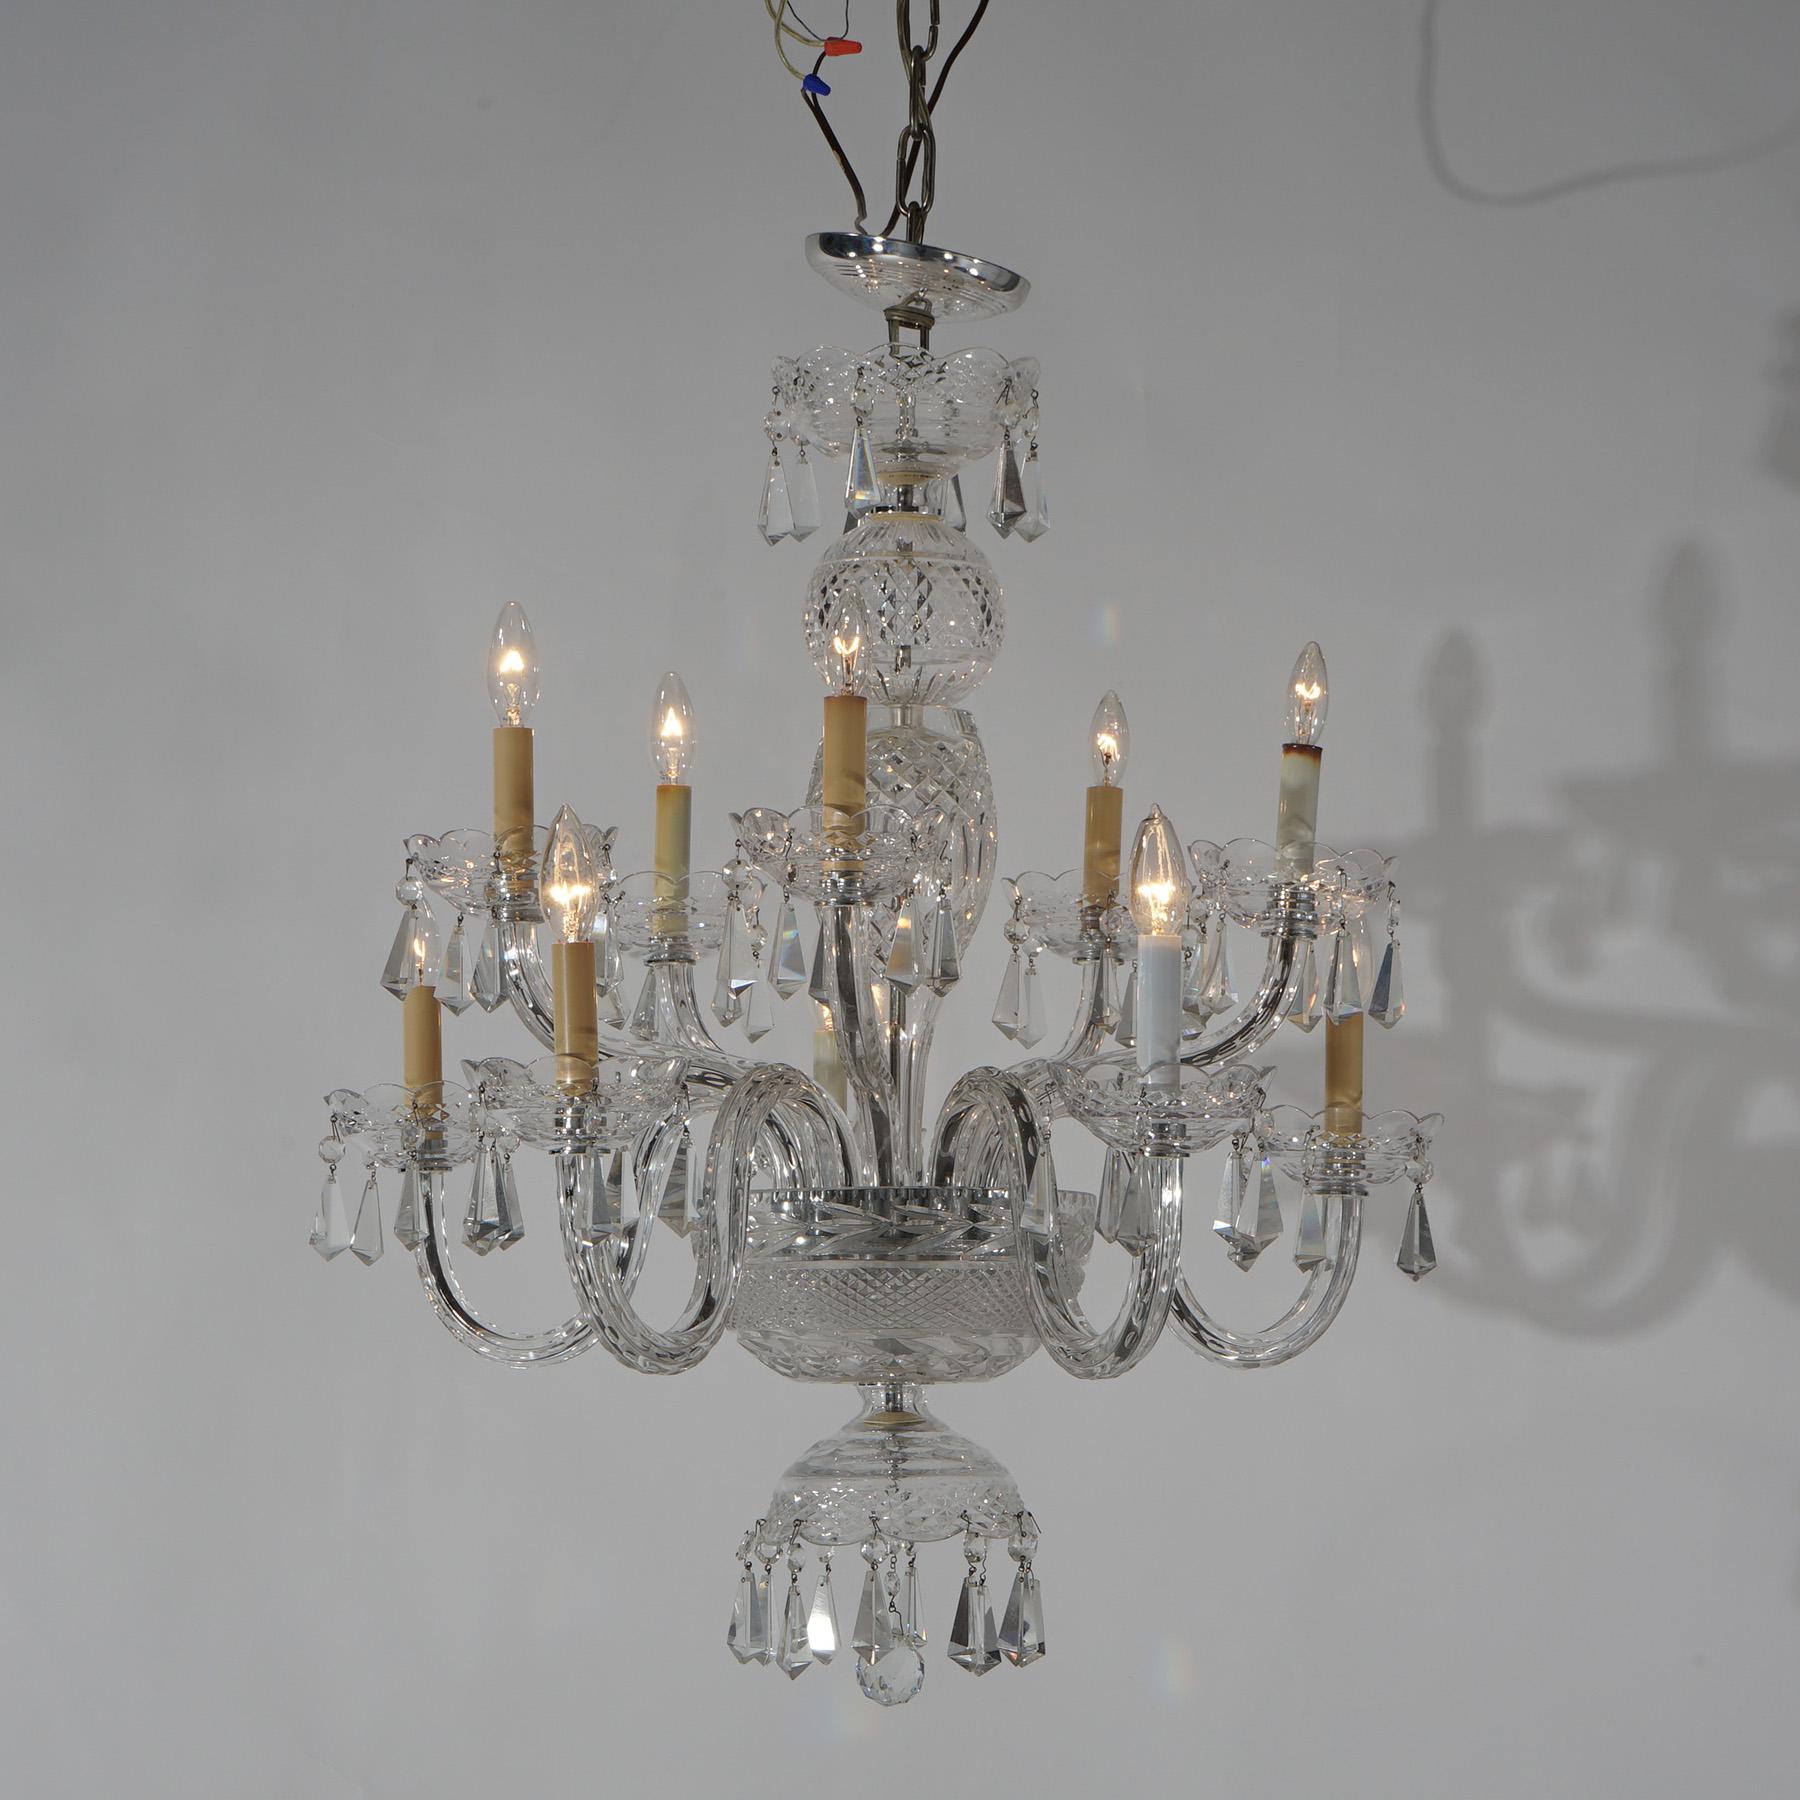 A Waterford chandelier offers cut crystal bodice with eight scroll form arms terminating in candle lights; cut crystals throughout; 20th century

Measures - 33